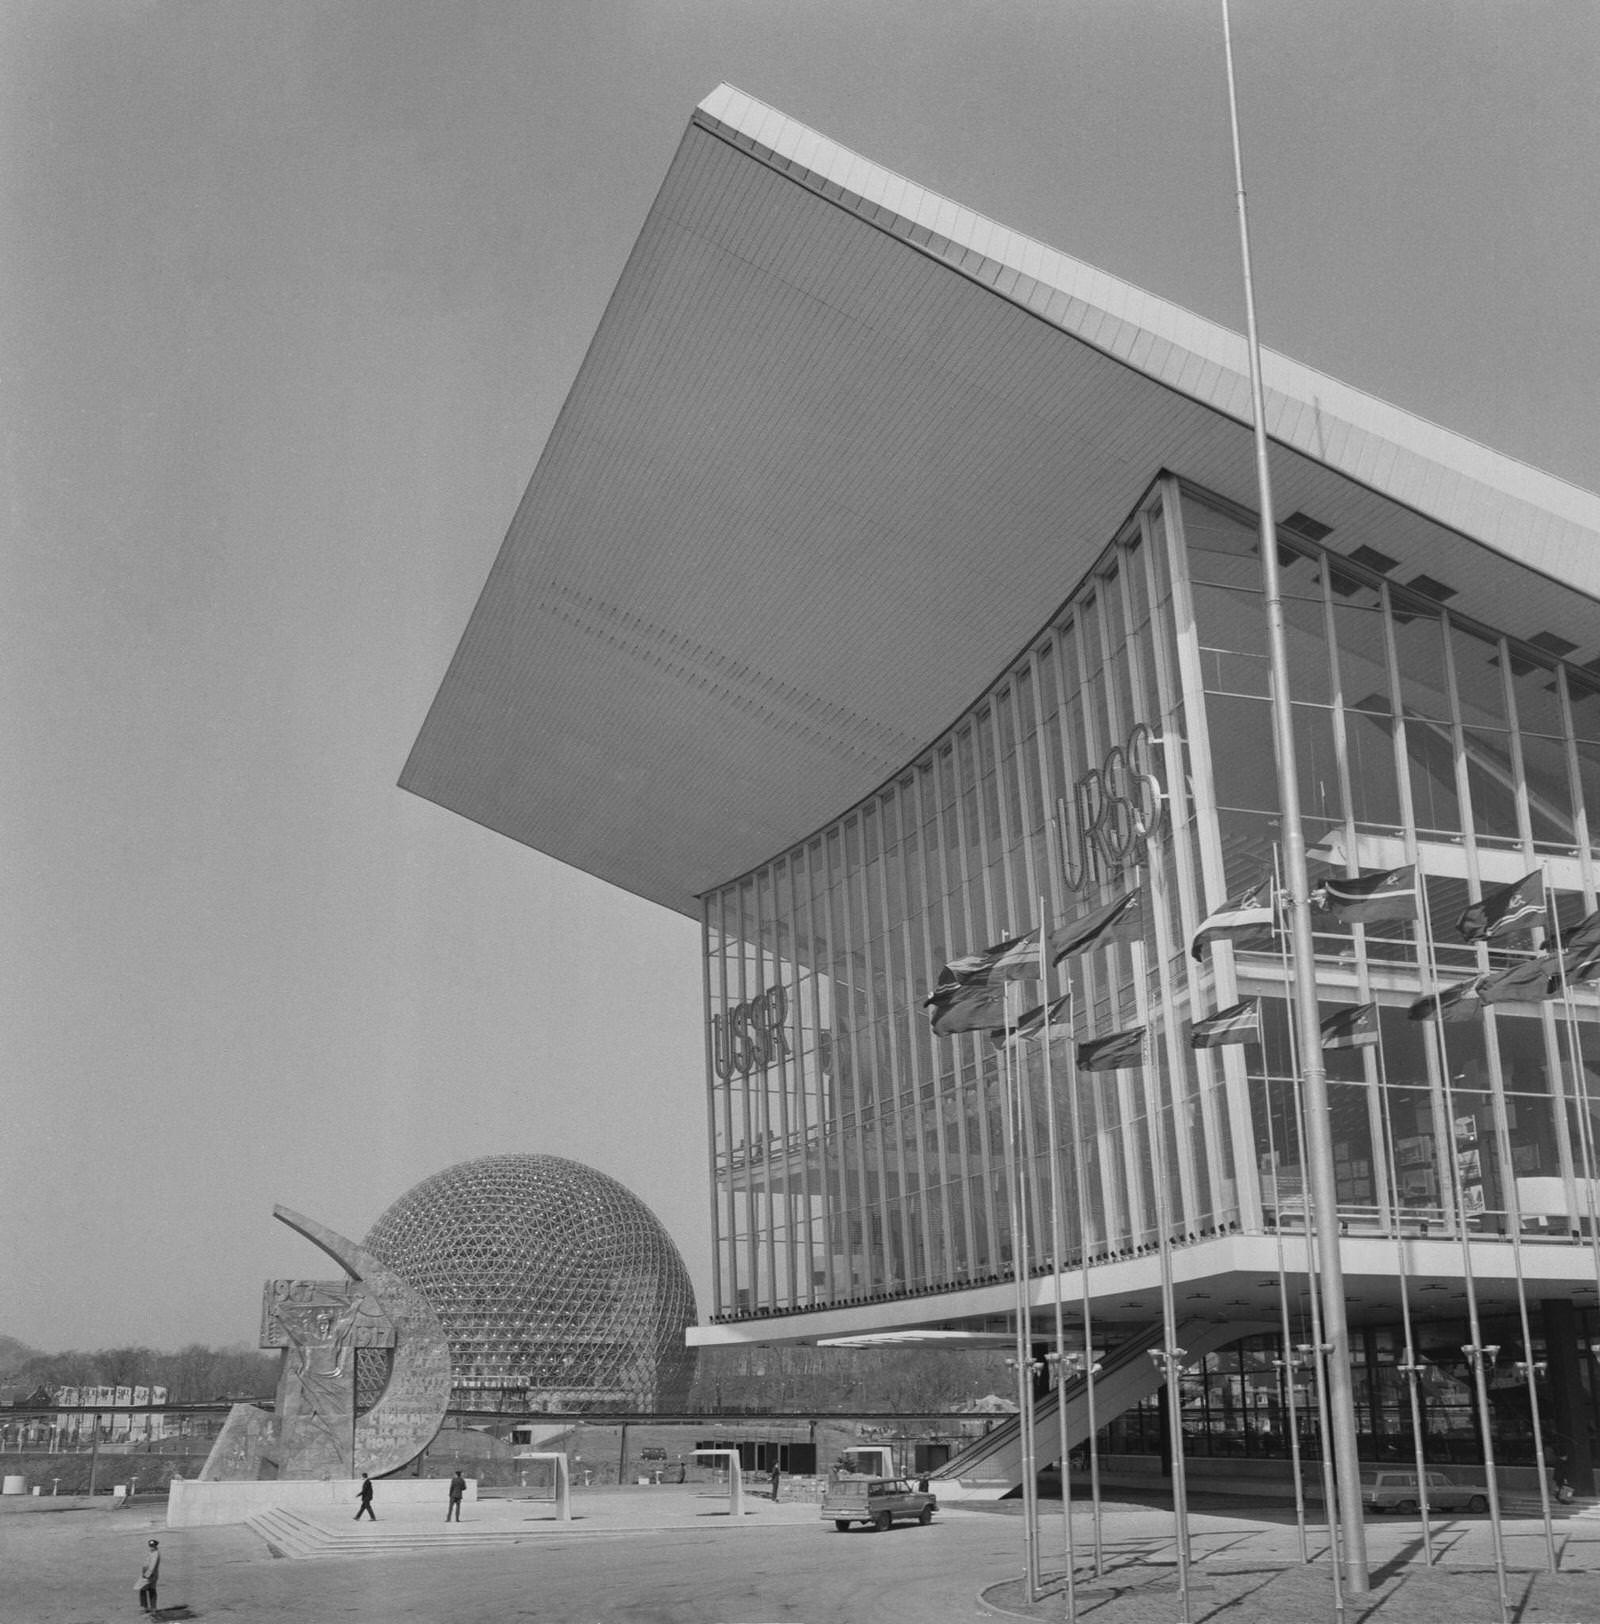 The pavilion of the USSR at the exhibition in Montreal, Canada, in 1967.